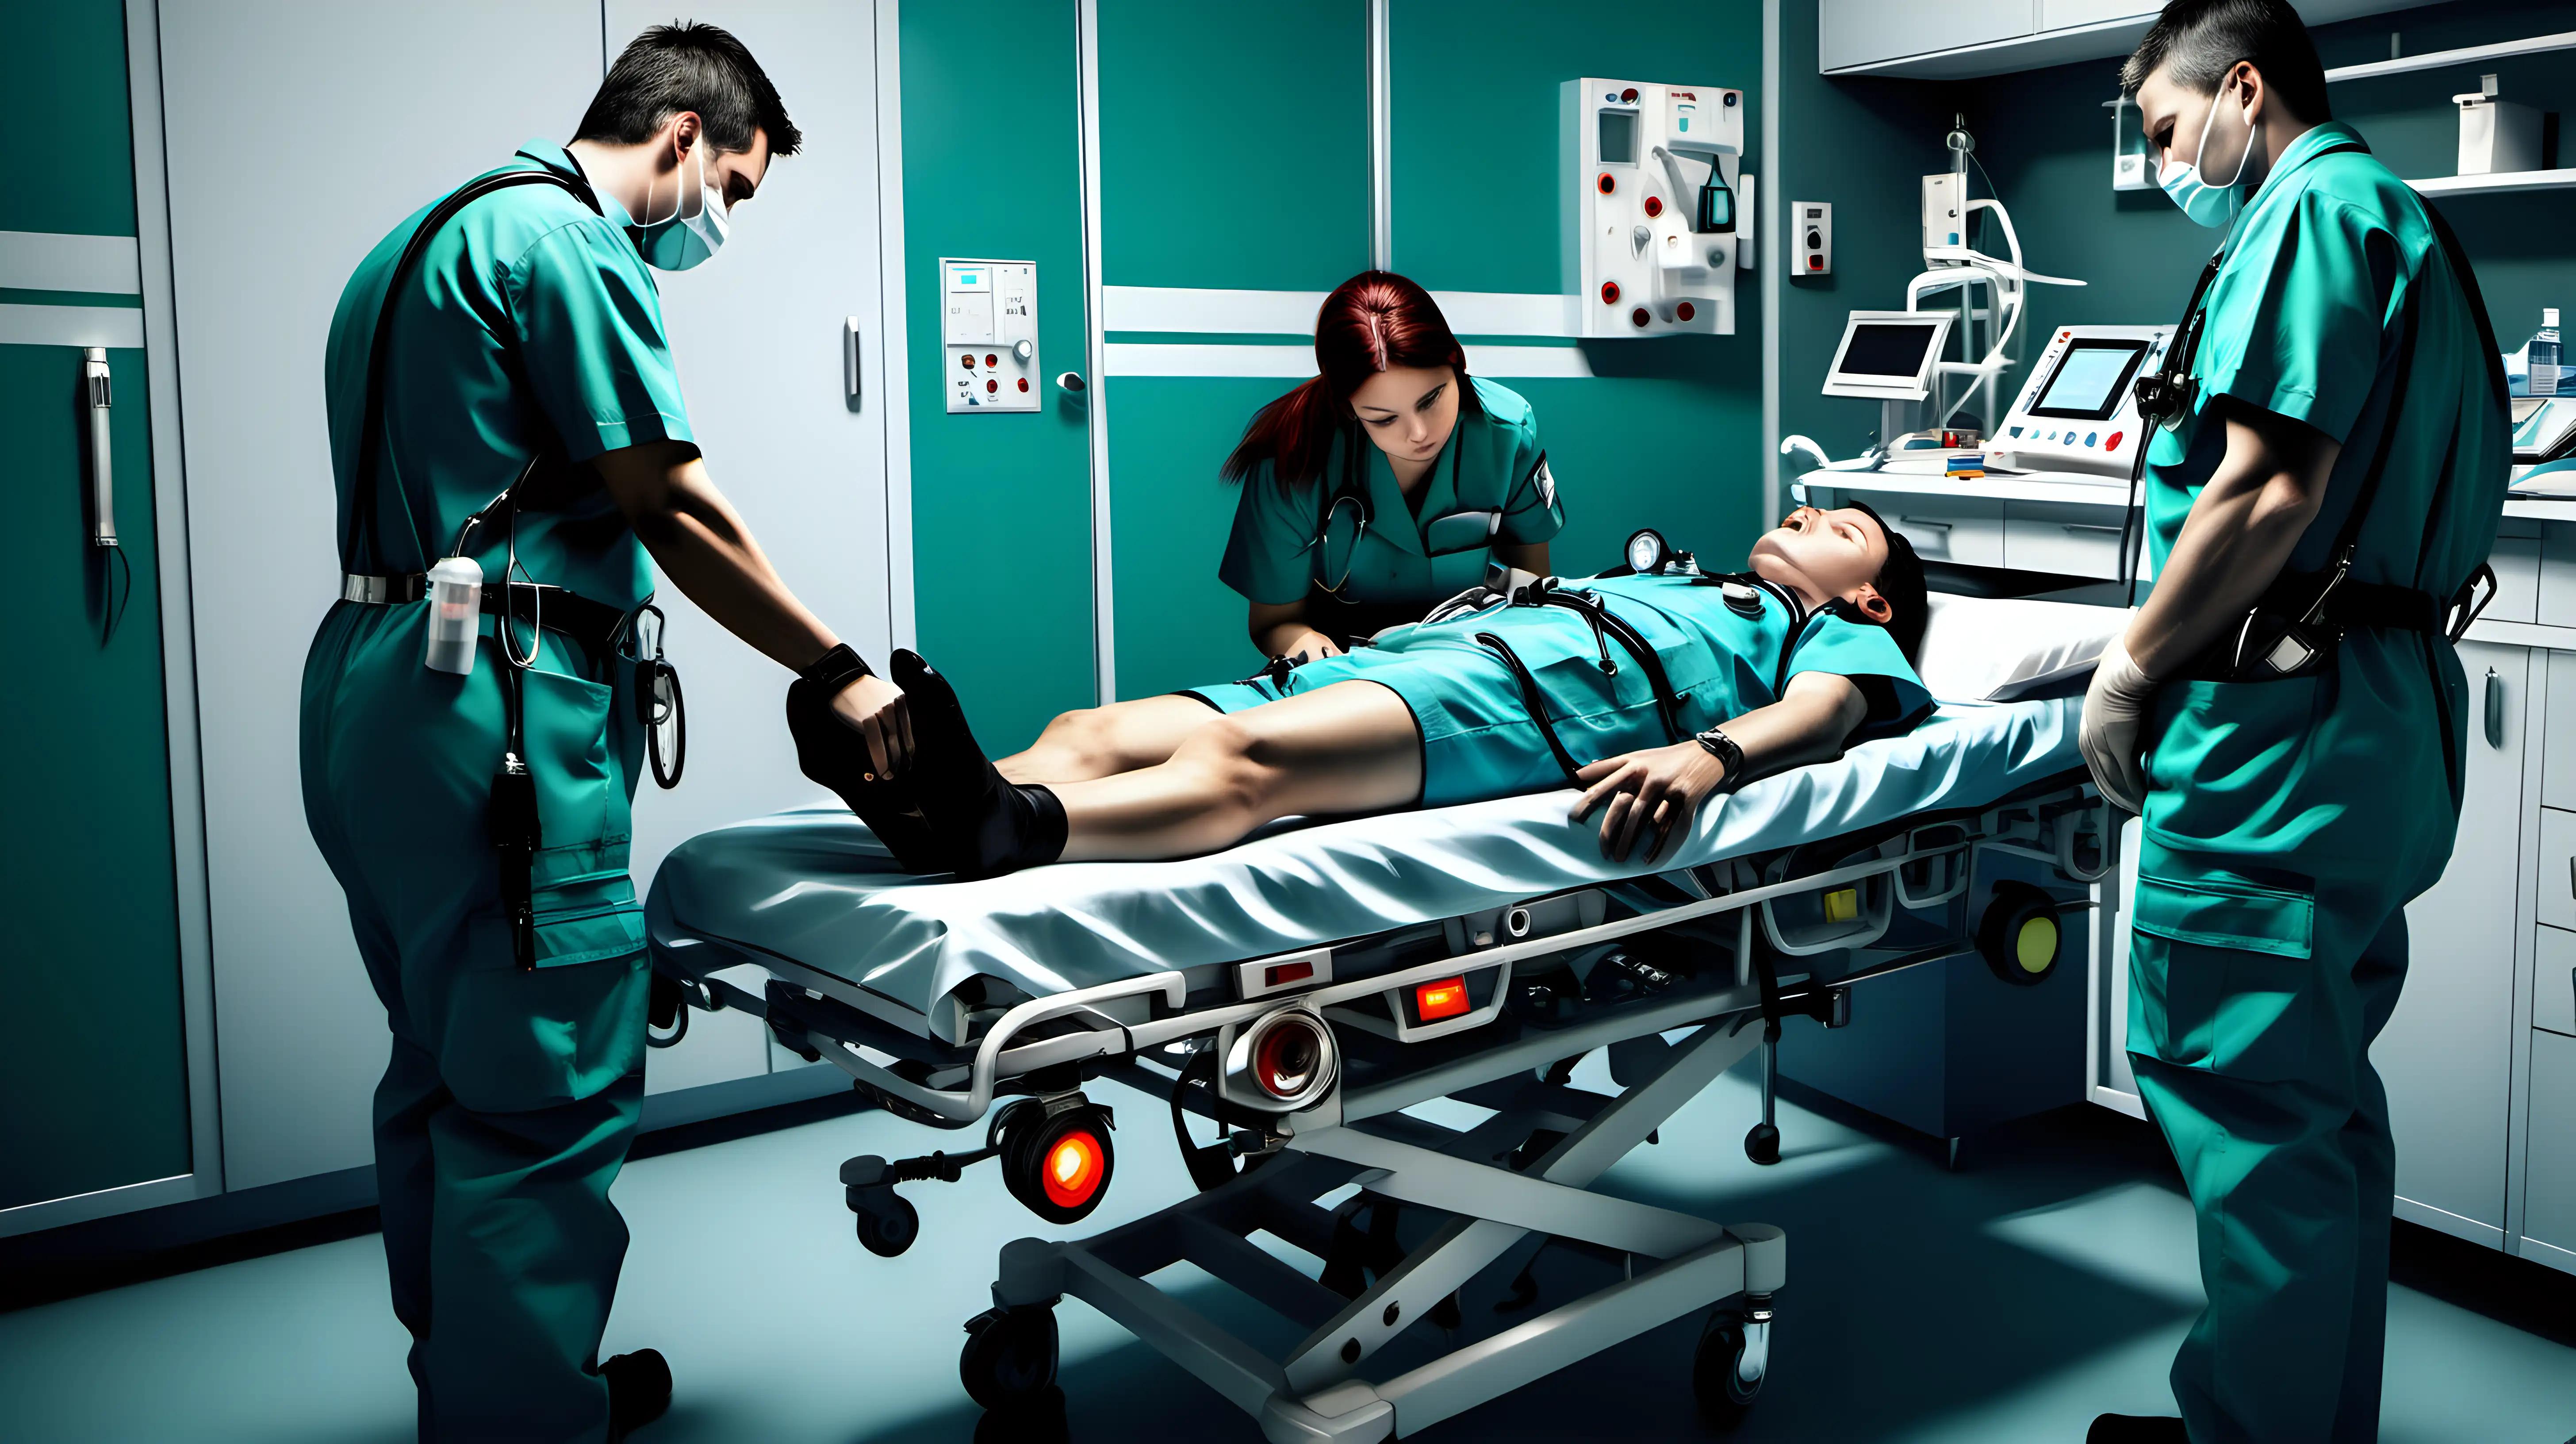 Illustrate a scene of a paramedic attending to a patient, surrounded by medical equipment and showing signs of exhaustion, underscoring the demanding nature of emergency medical services.